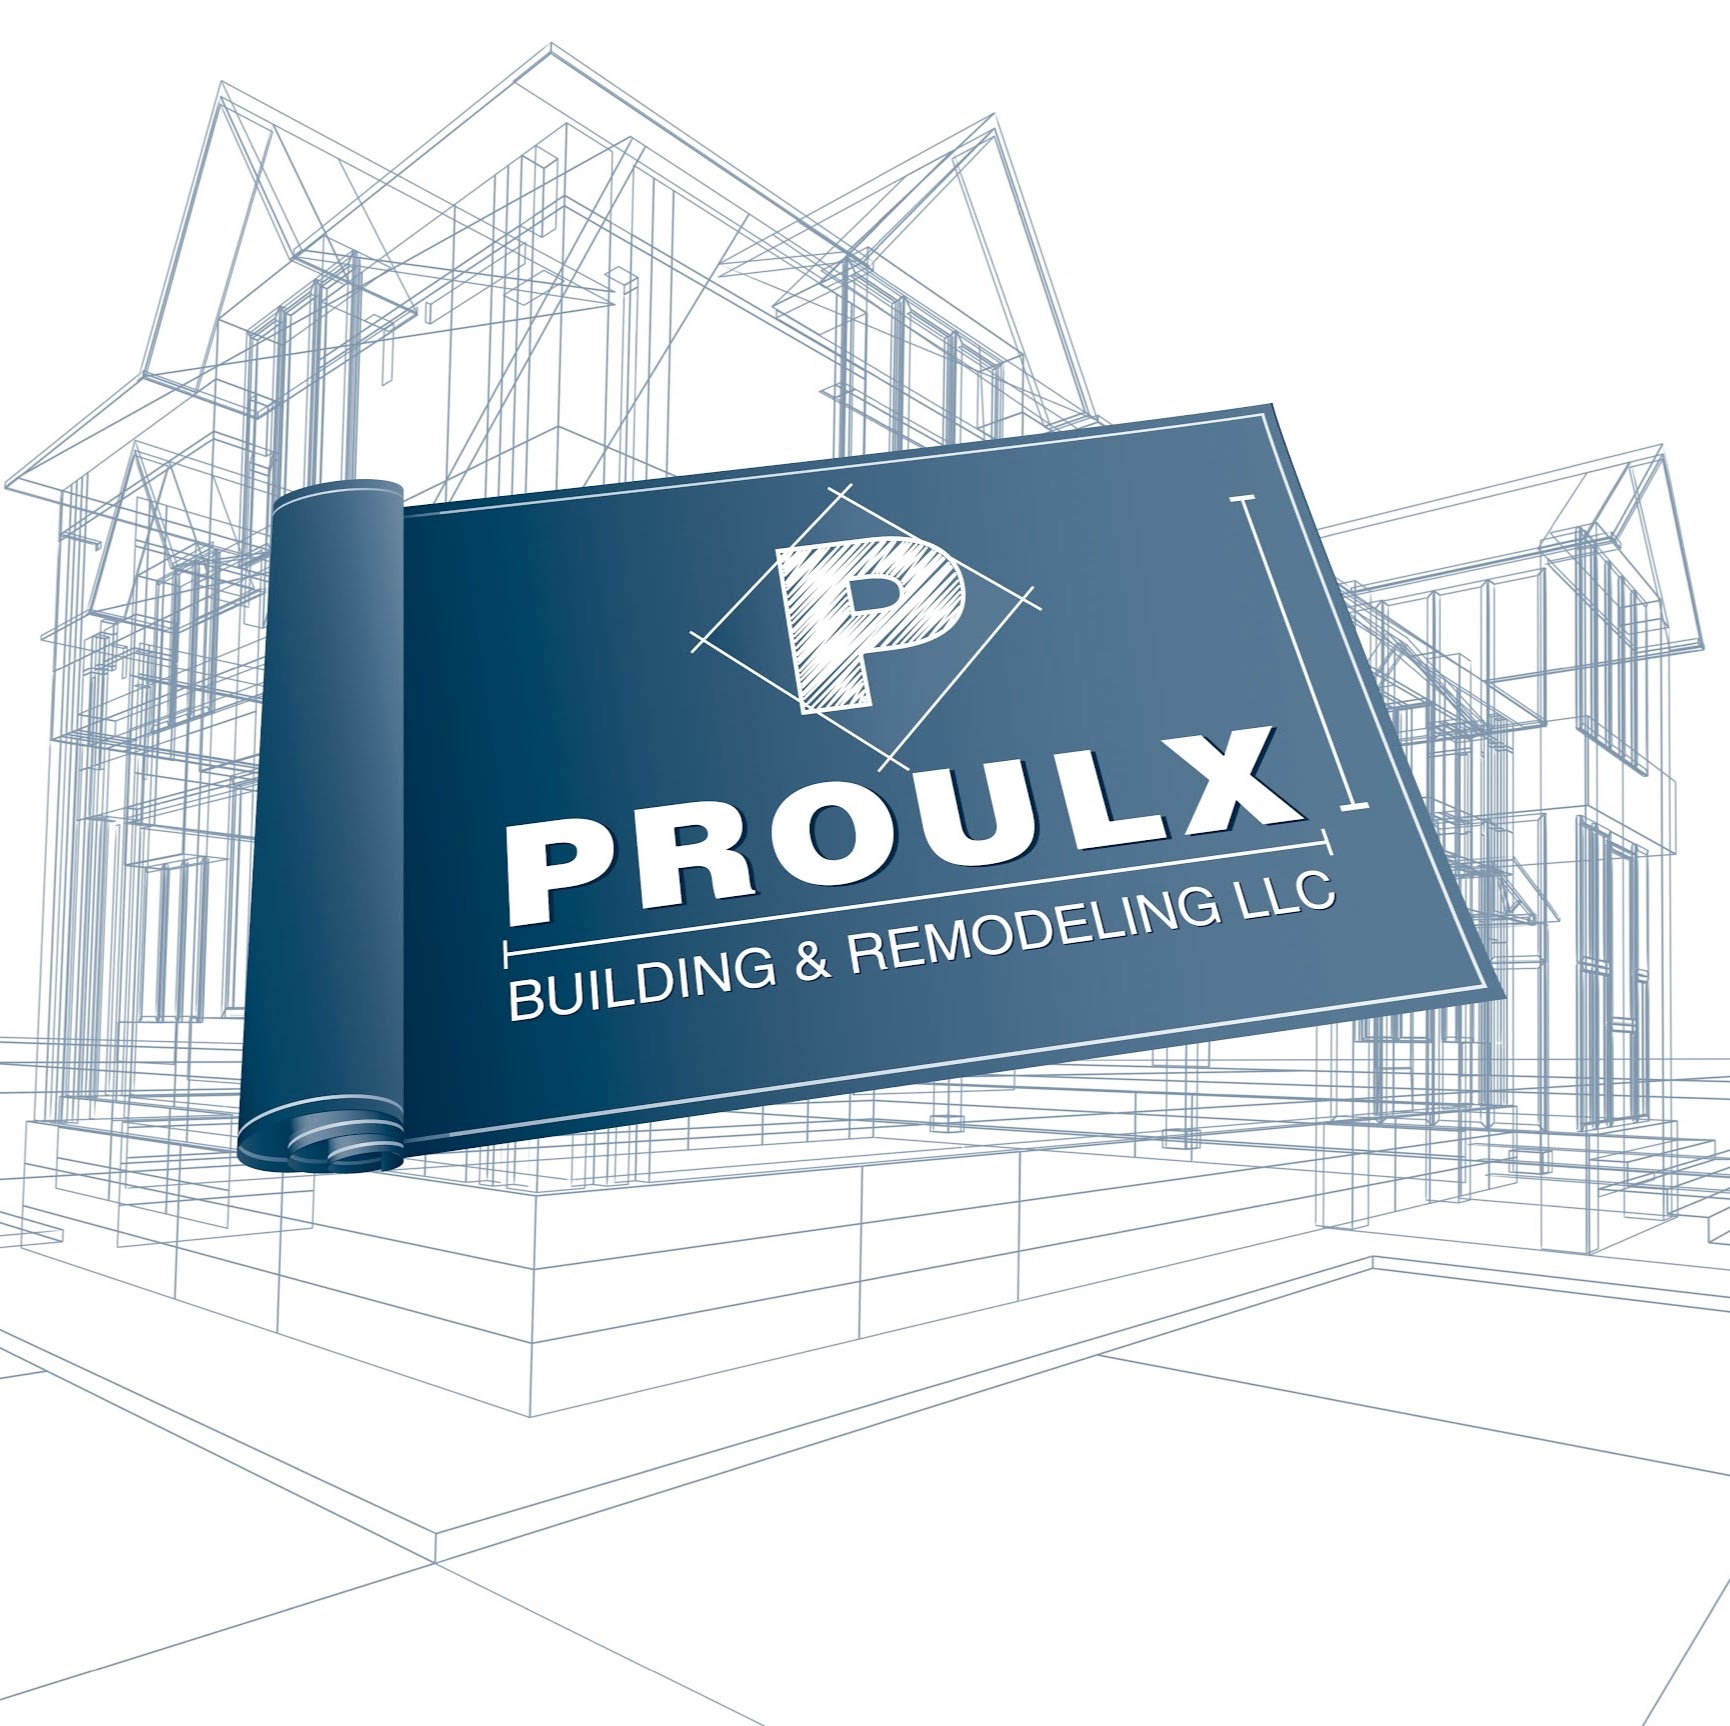 Proulx Building & Remodeling LLC 132B W Main St Apt. B, Stafford Springs Connecticut 06076